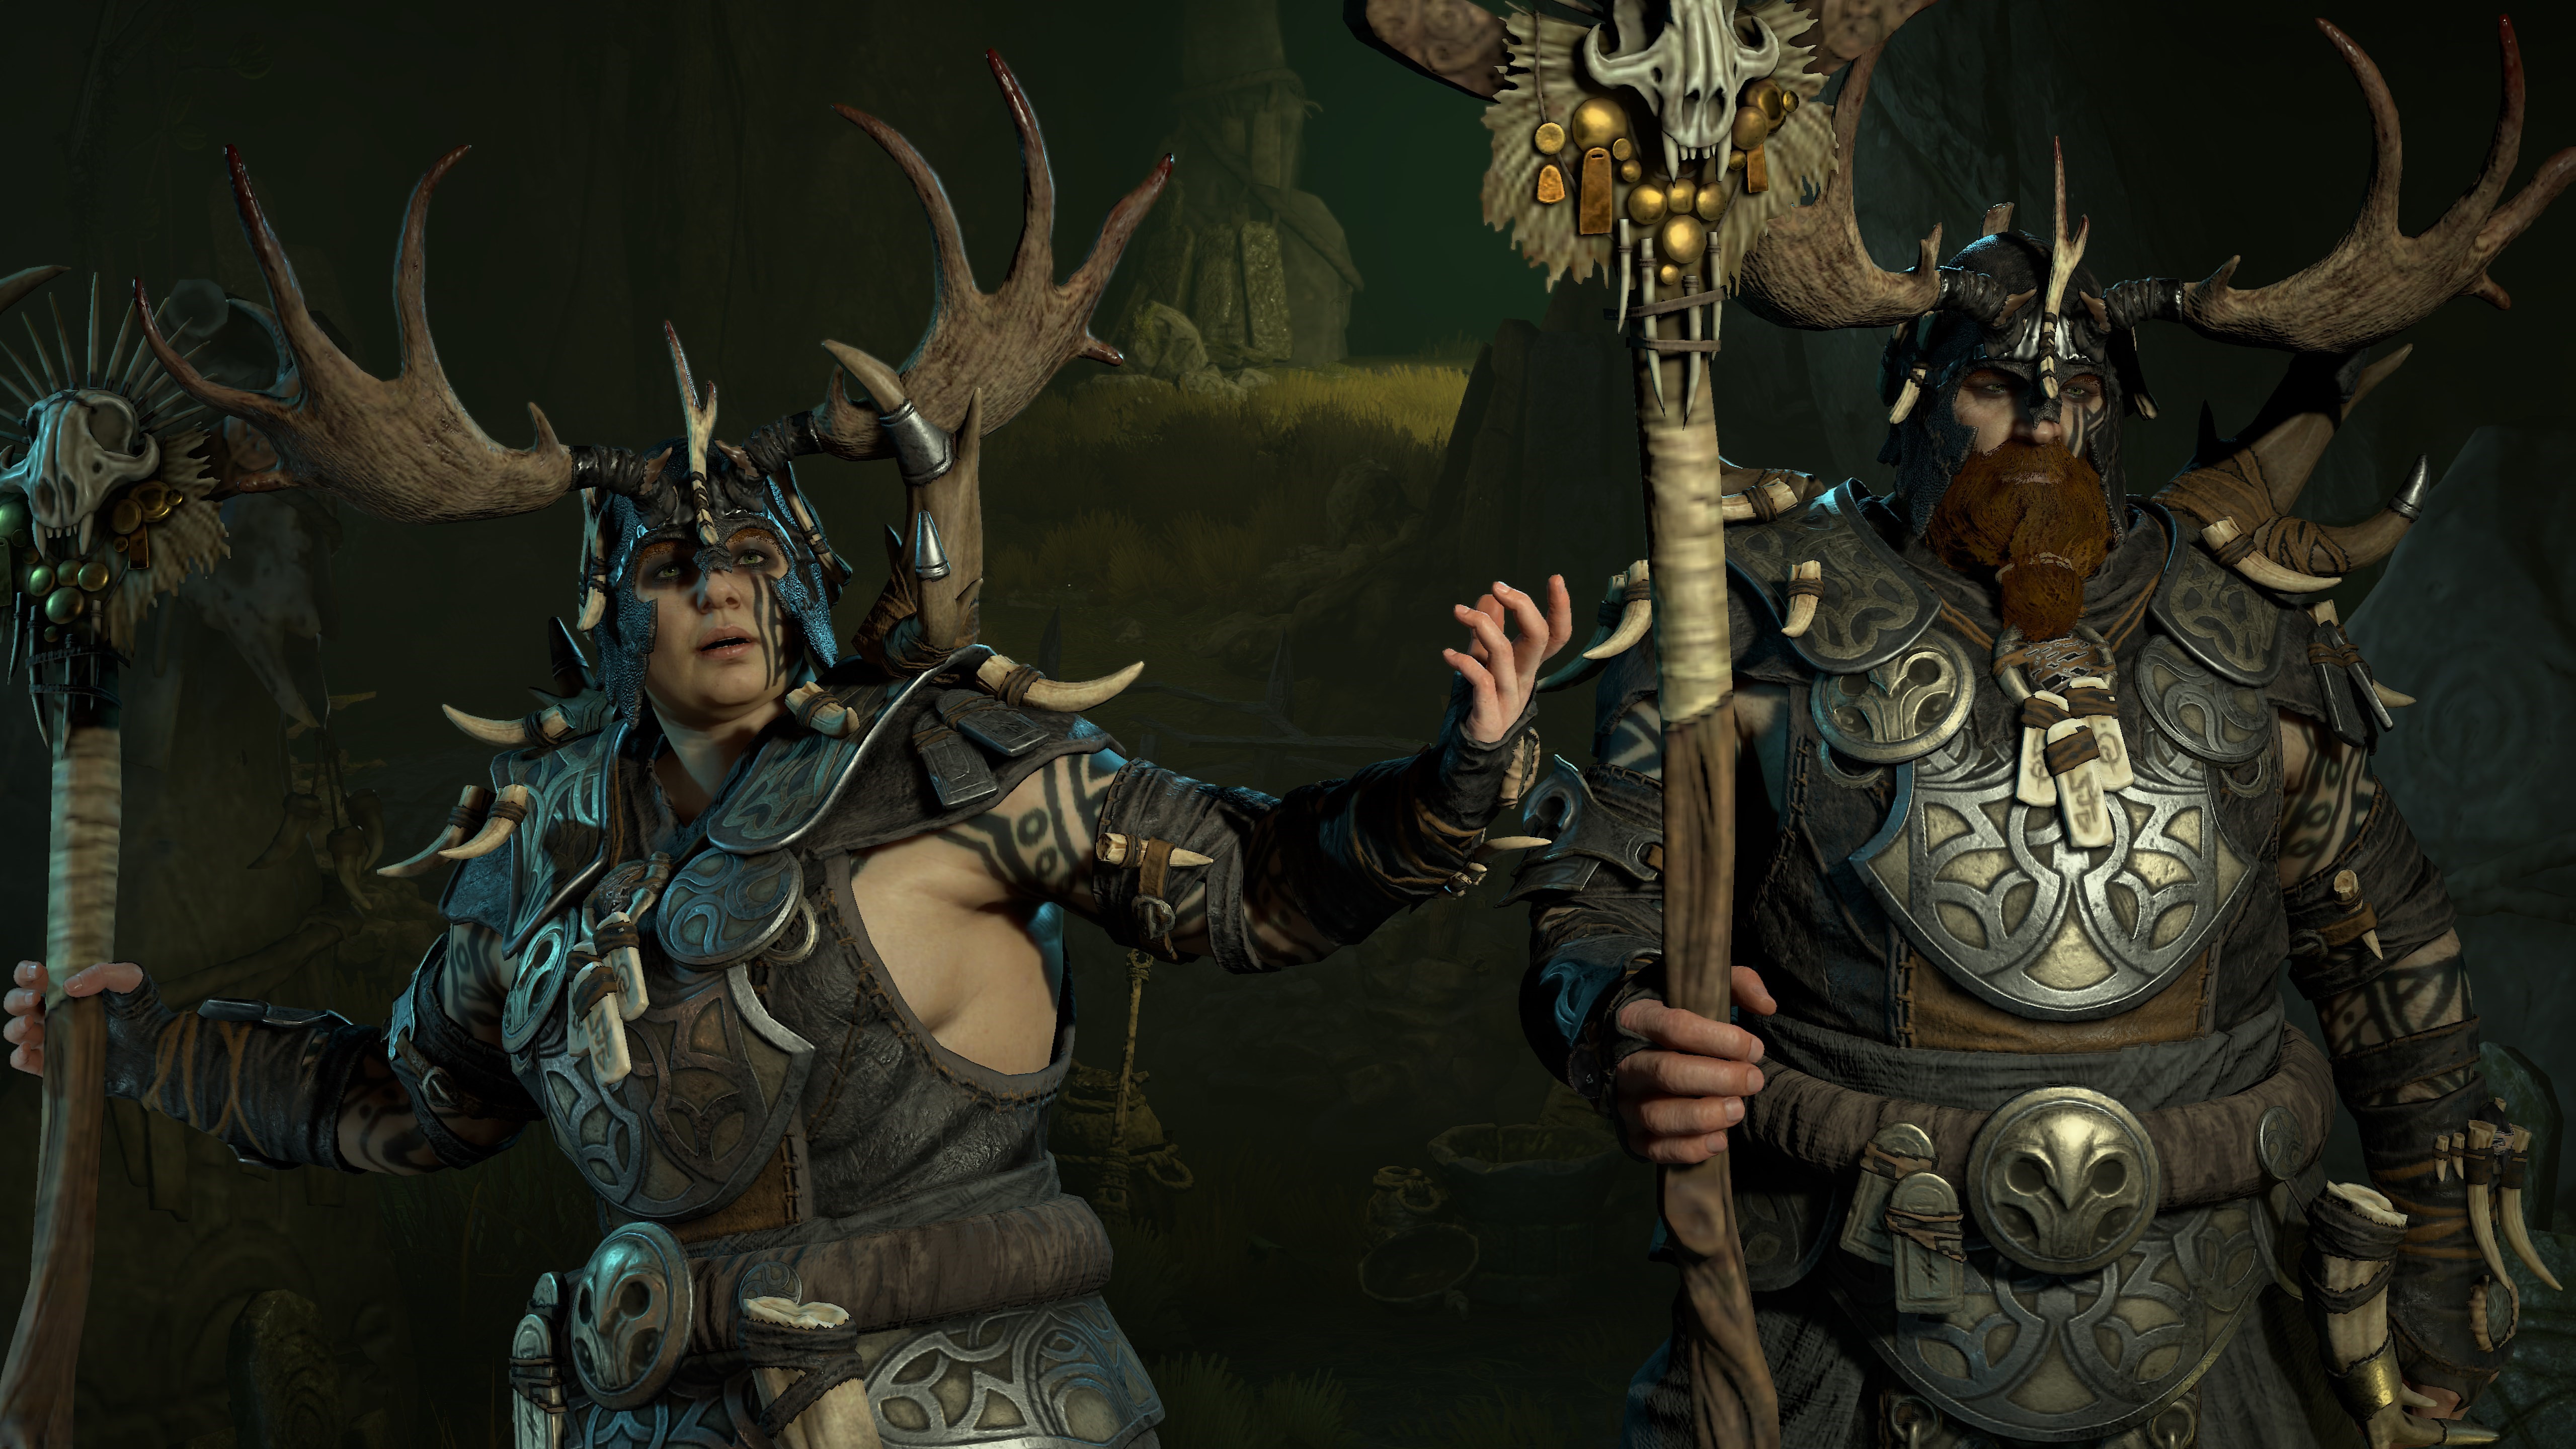 Two druids standing next to each other wearing matching armor. They Both have helmets with antlers on